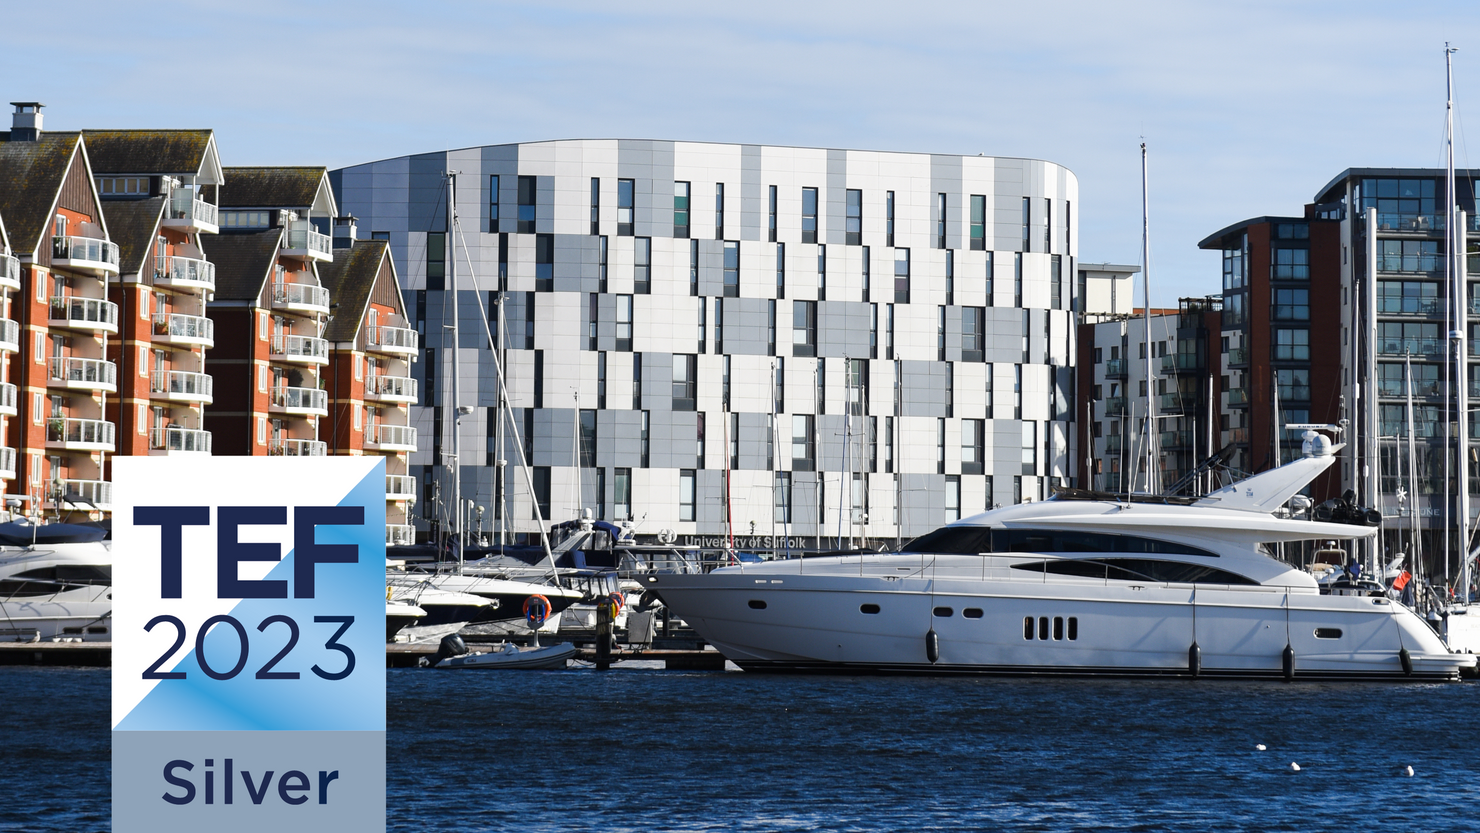 A photo of the Waterfront Building with a graphic of the TEF silver rating superimposed on it